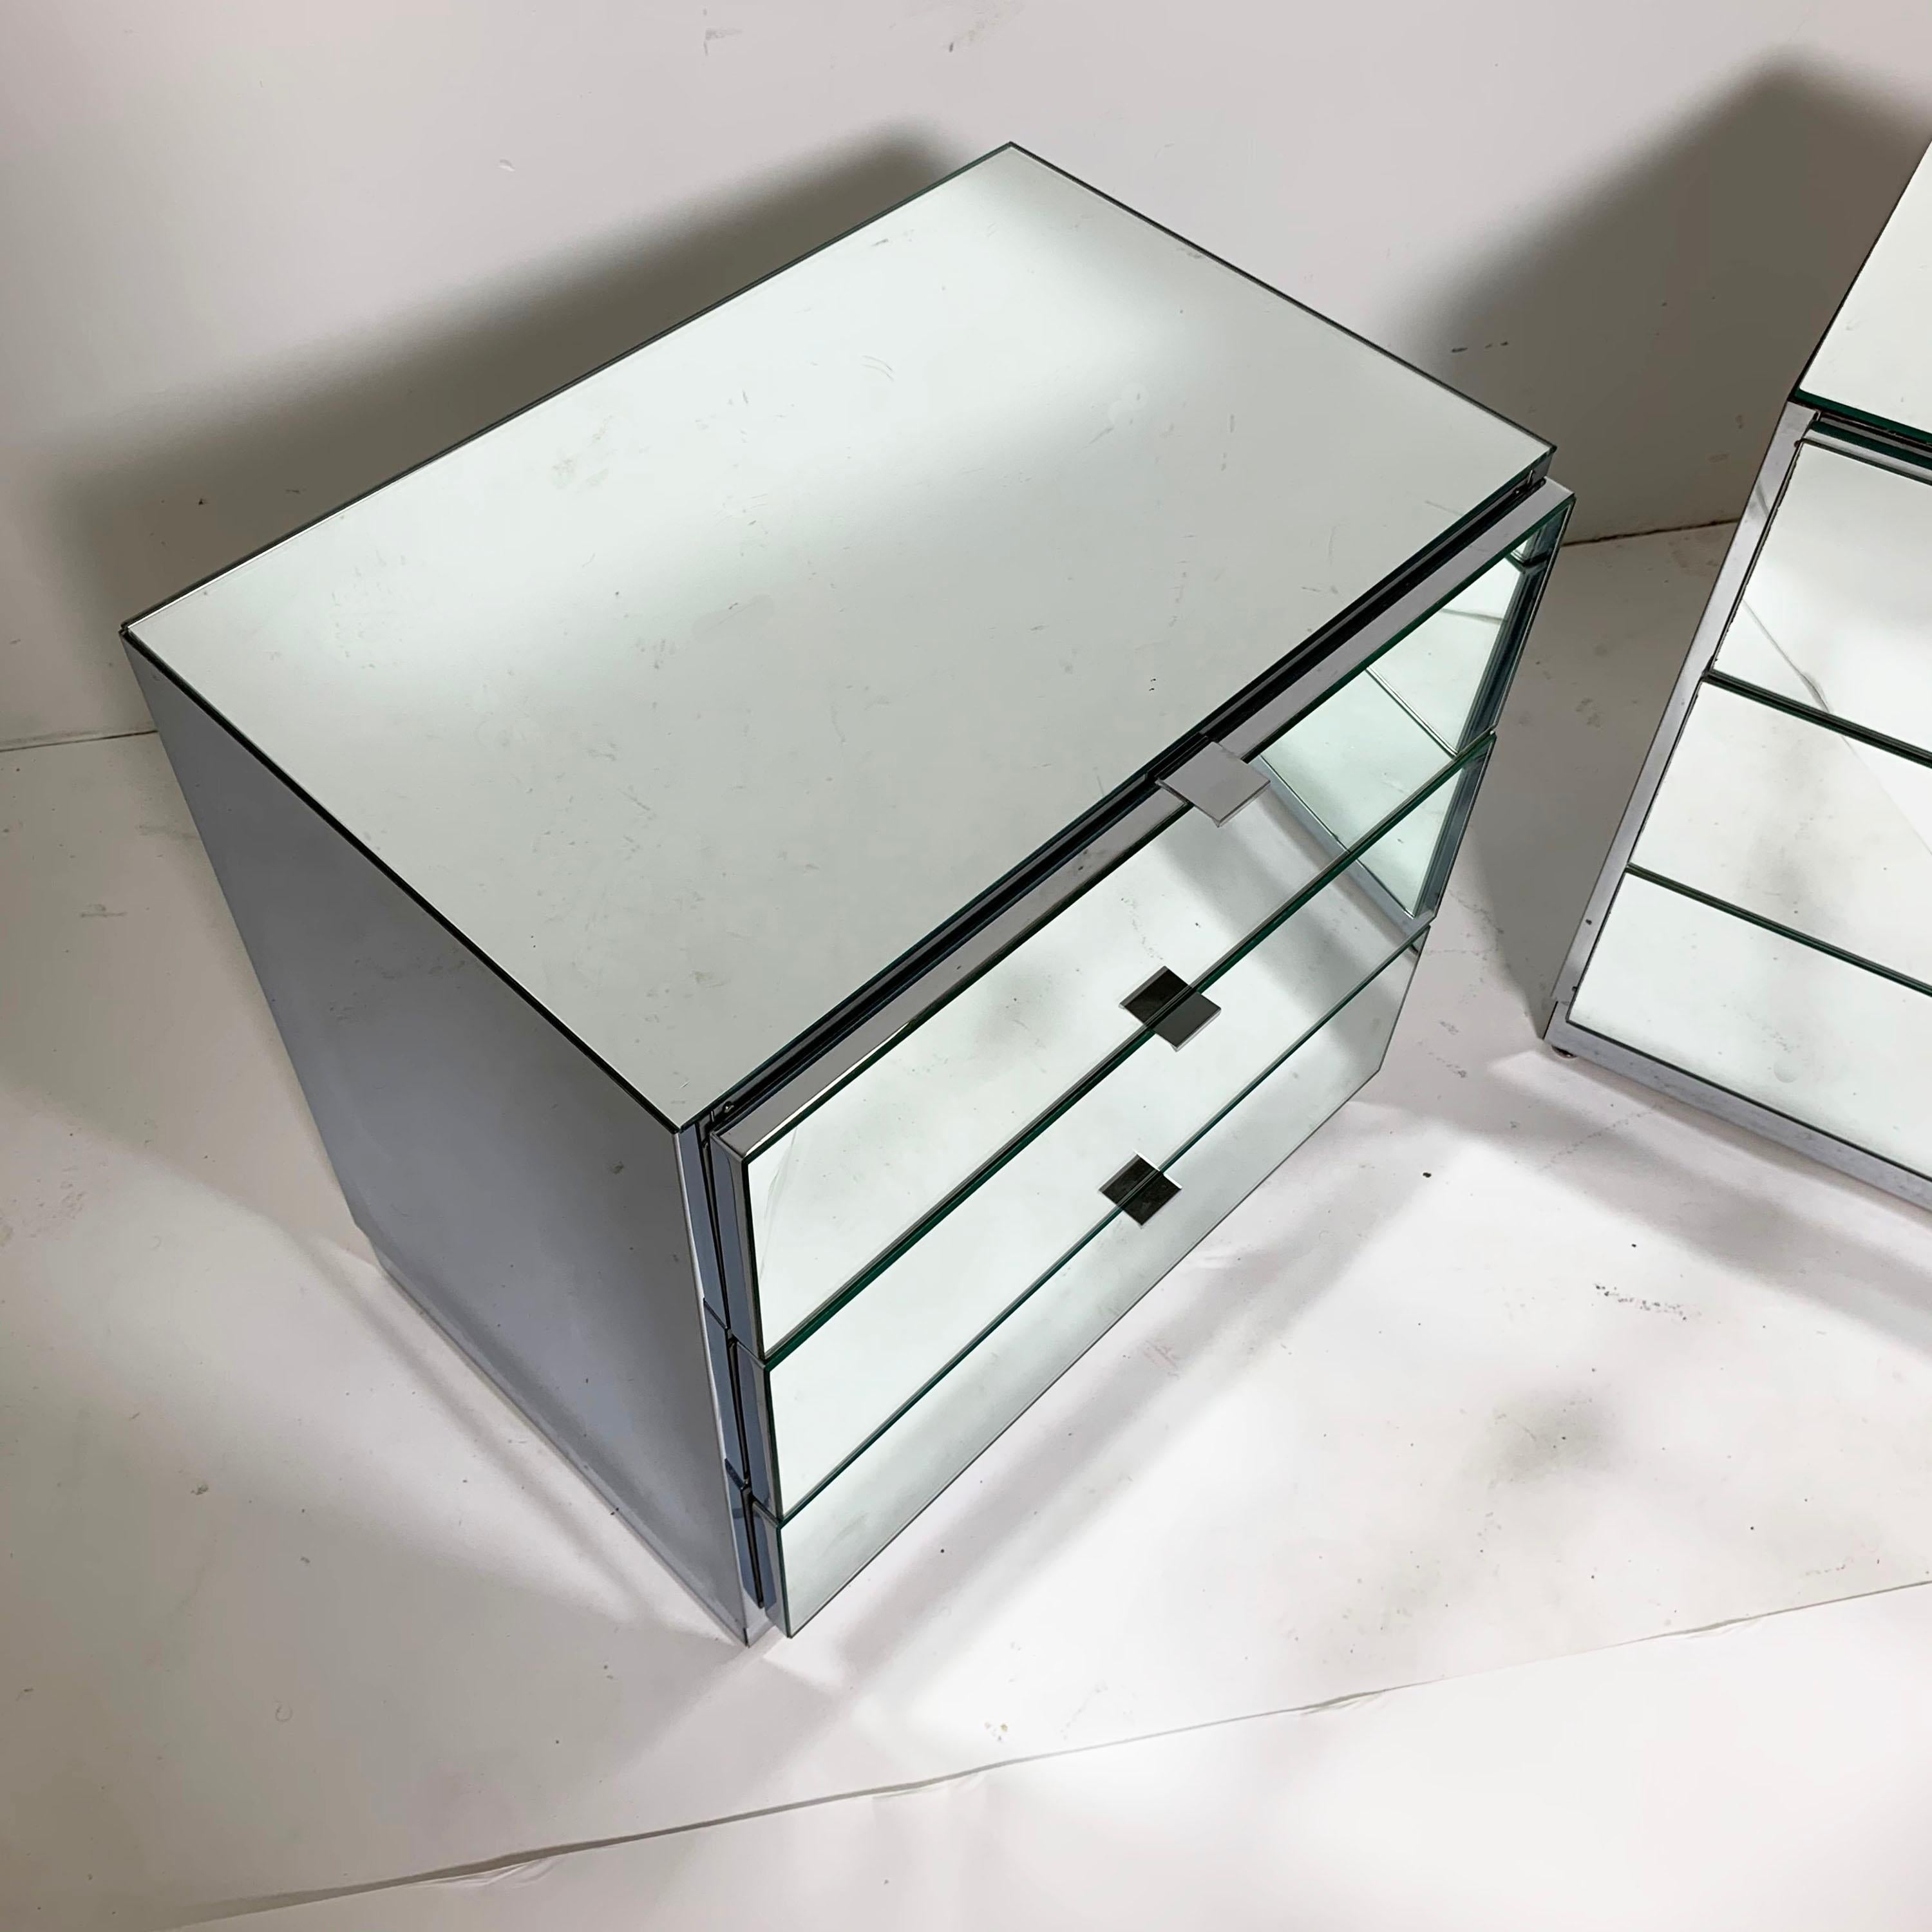 American Pair of Ello Mirrored Three-Drawer Cabinets or Nightstands, circa 1980s